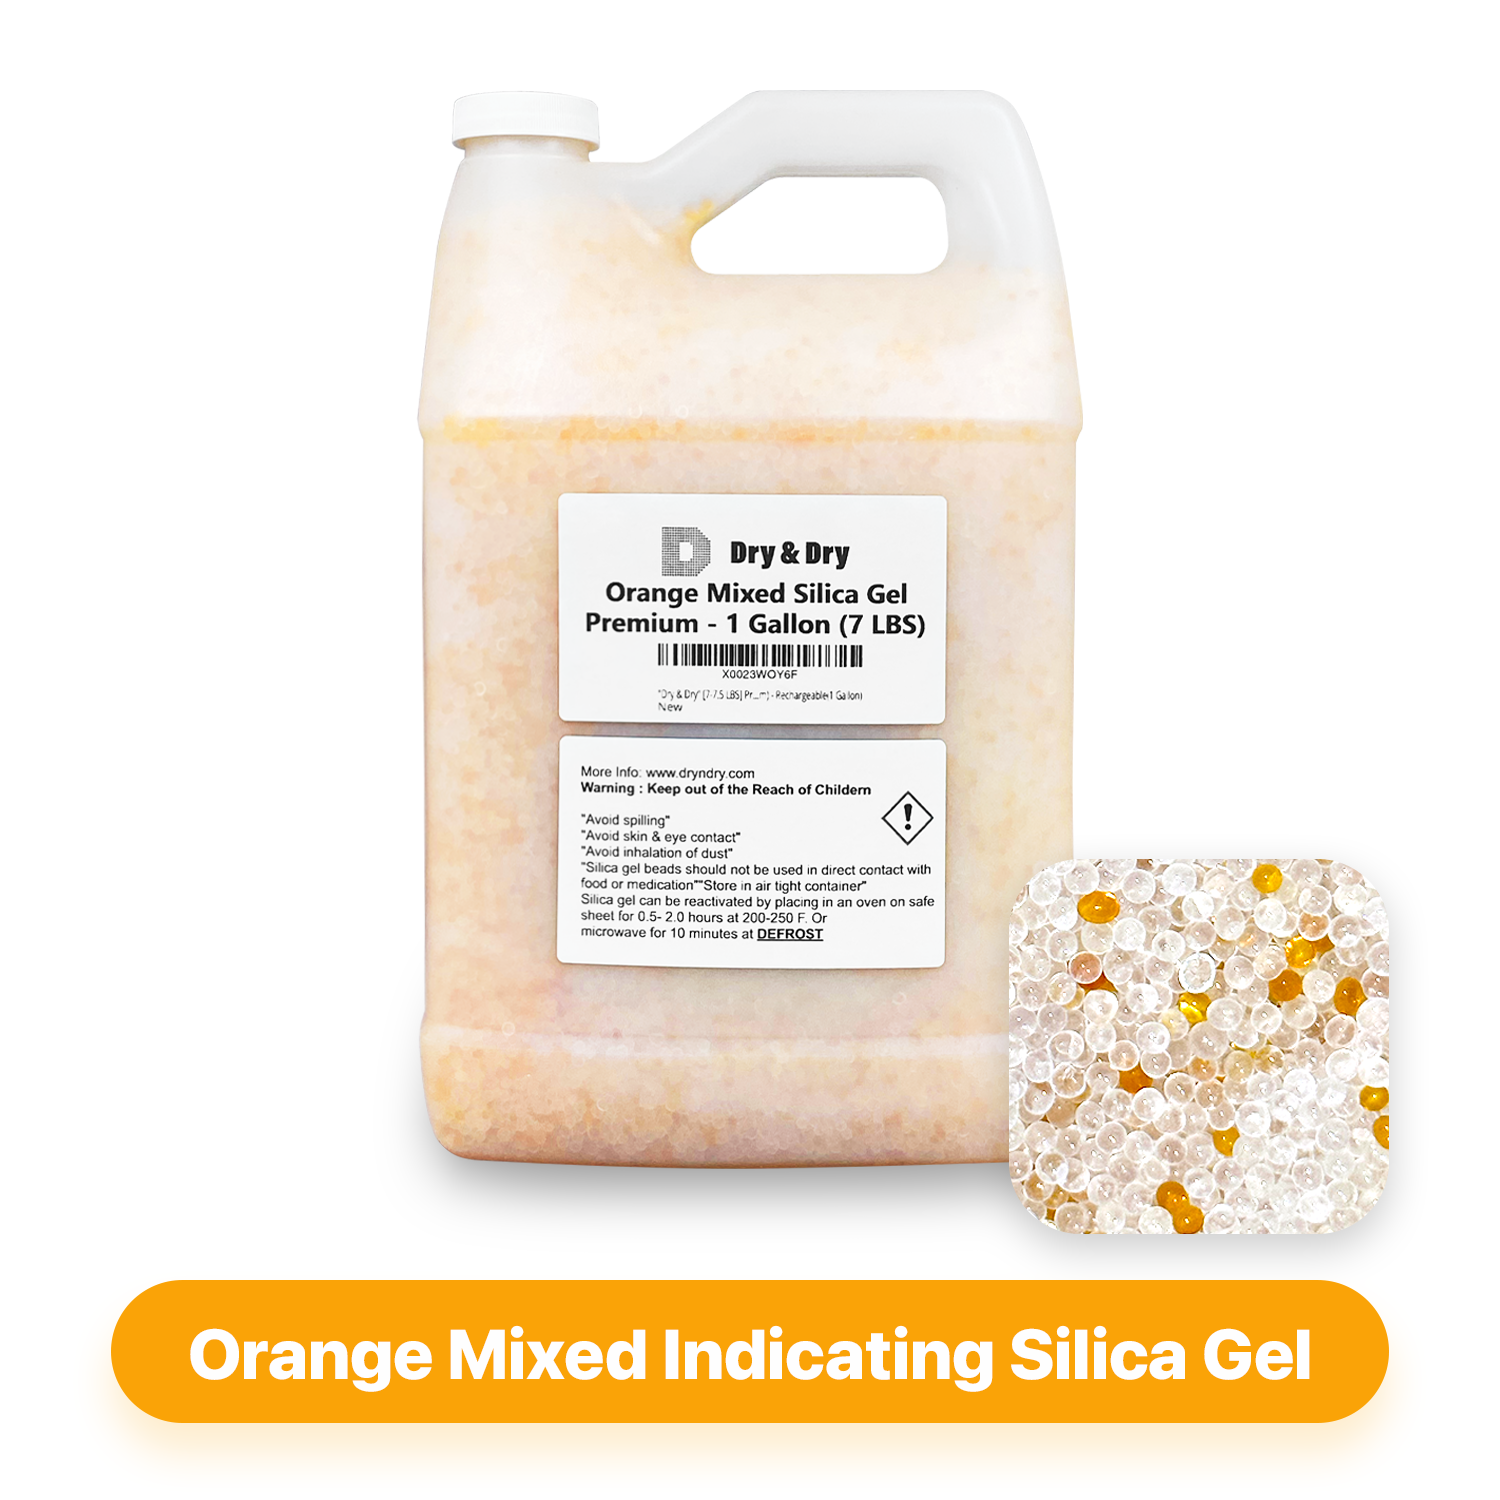 1 Gallon(7-7.5 LBS) "Dry & Dry" Premium Orange & White Mixed Indicating Silica Gel Desiccant Beads(Industry Standard 3-5 mm) - Rechargeable